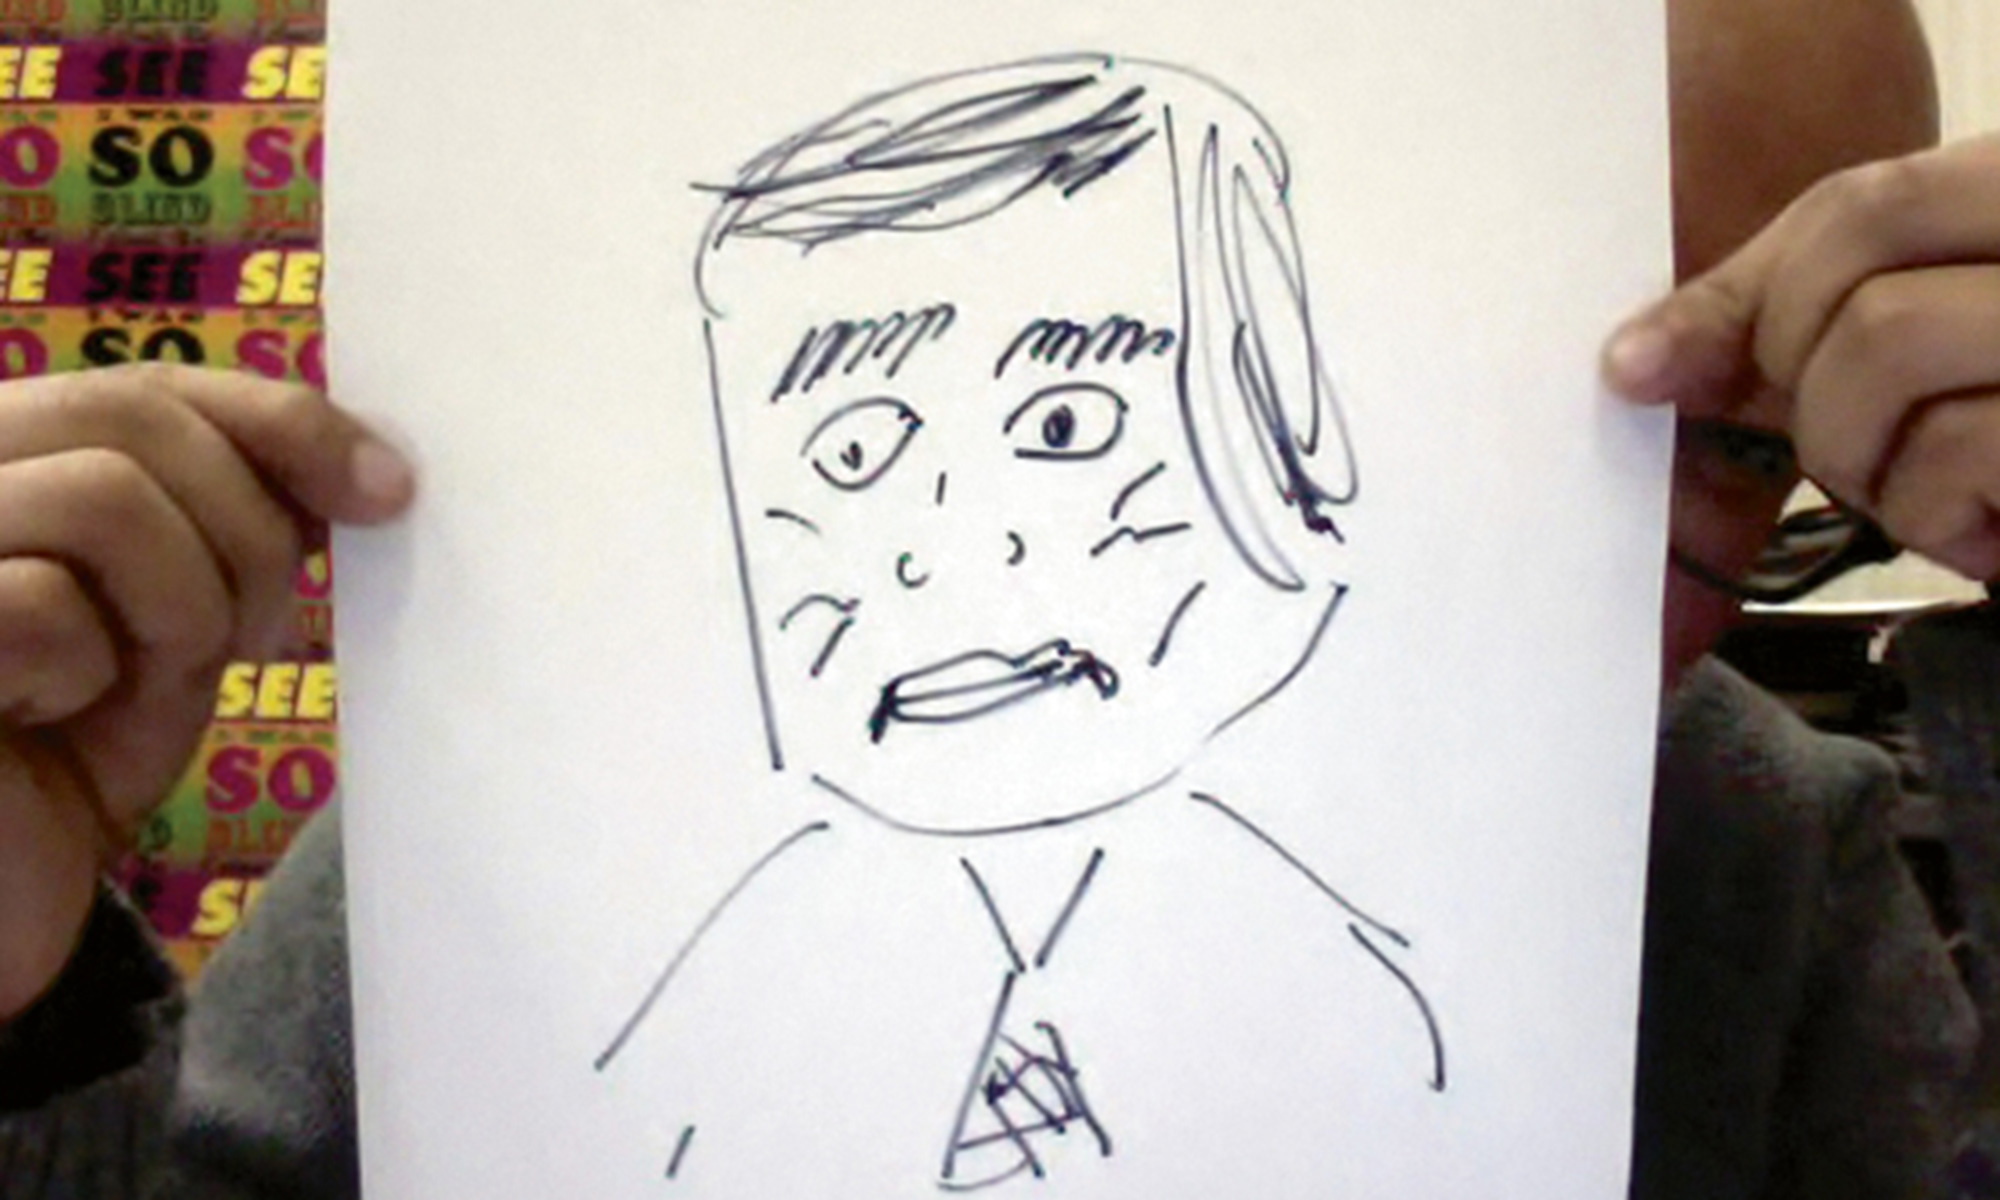 Allan Espiritu’s drawing of a commentator who was on a show that lasted about sixty minutes, every week.